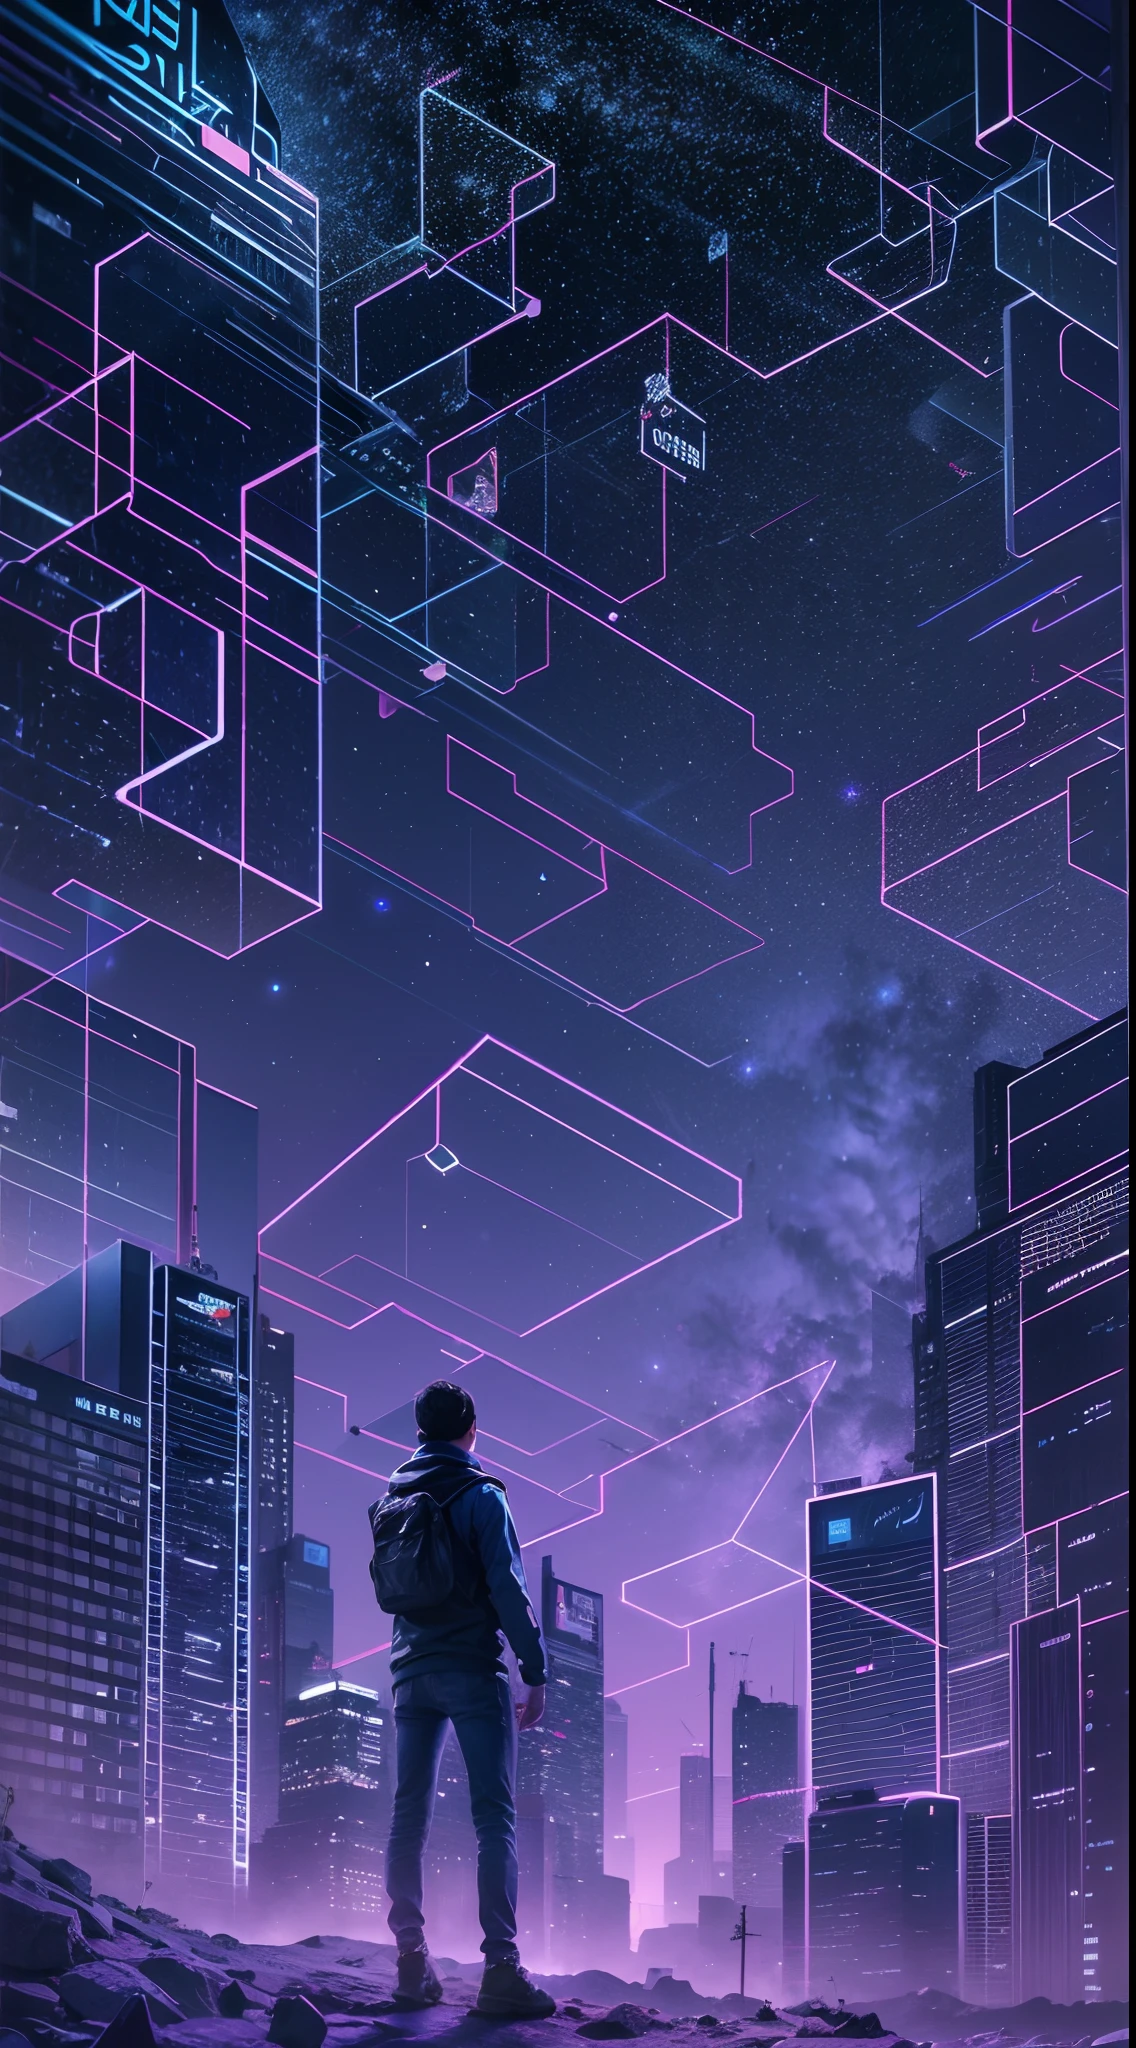 starry sky with the constellations of the zodiac, shades of purple as if they were nebulae, vast space, cyberpunk city at the bottom,